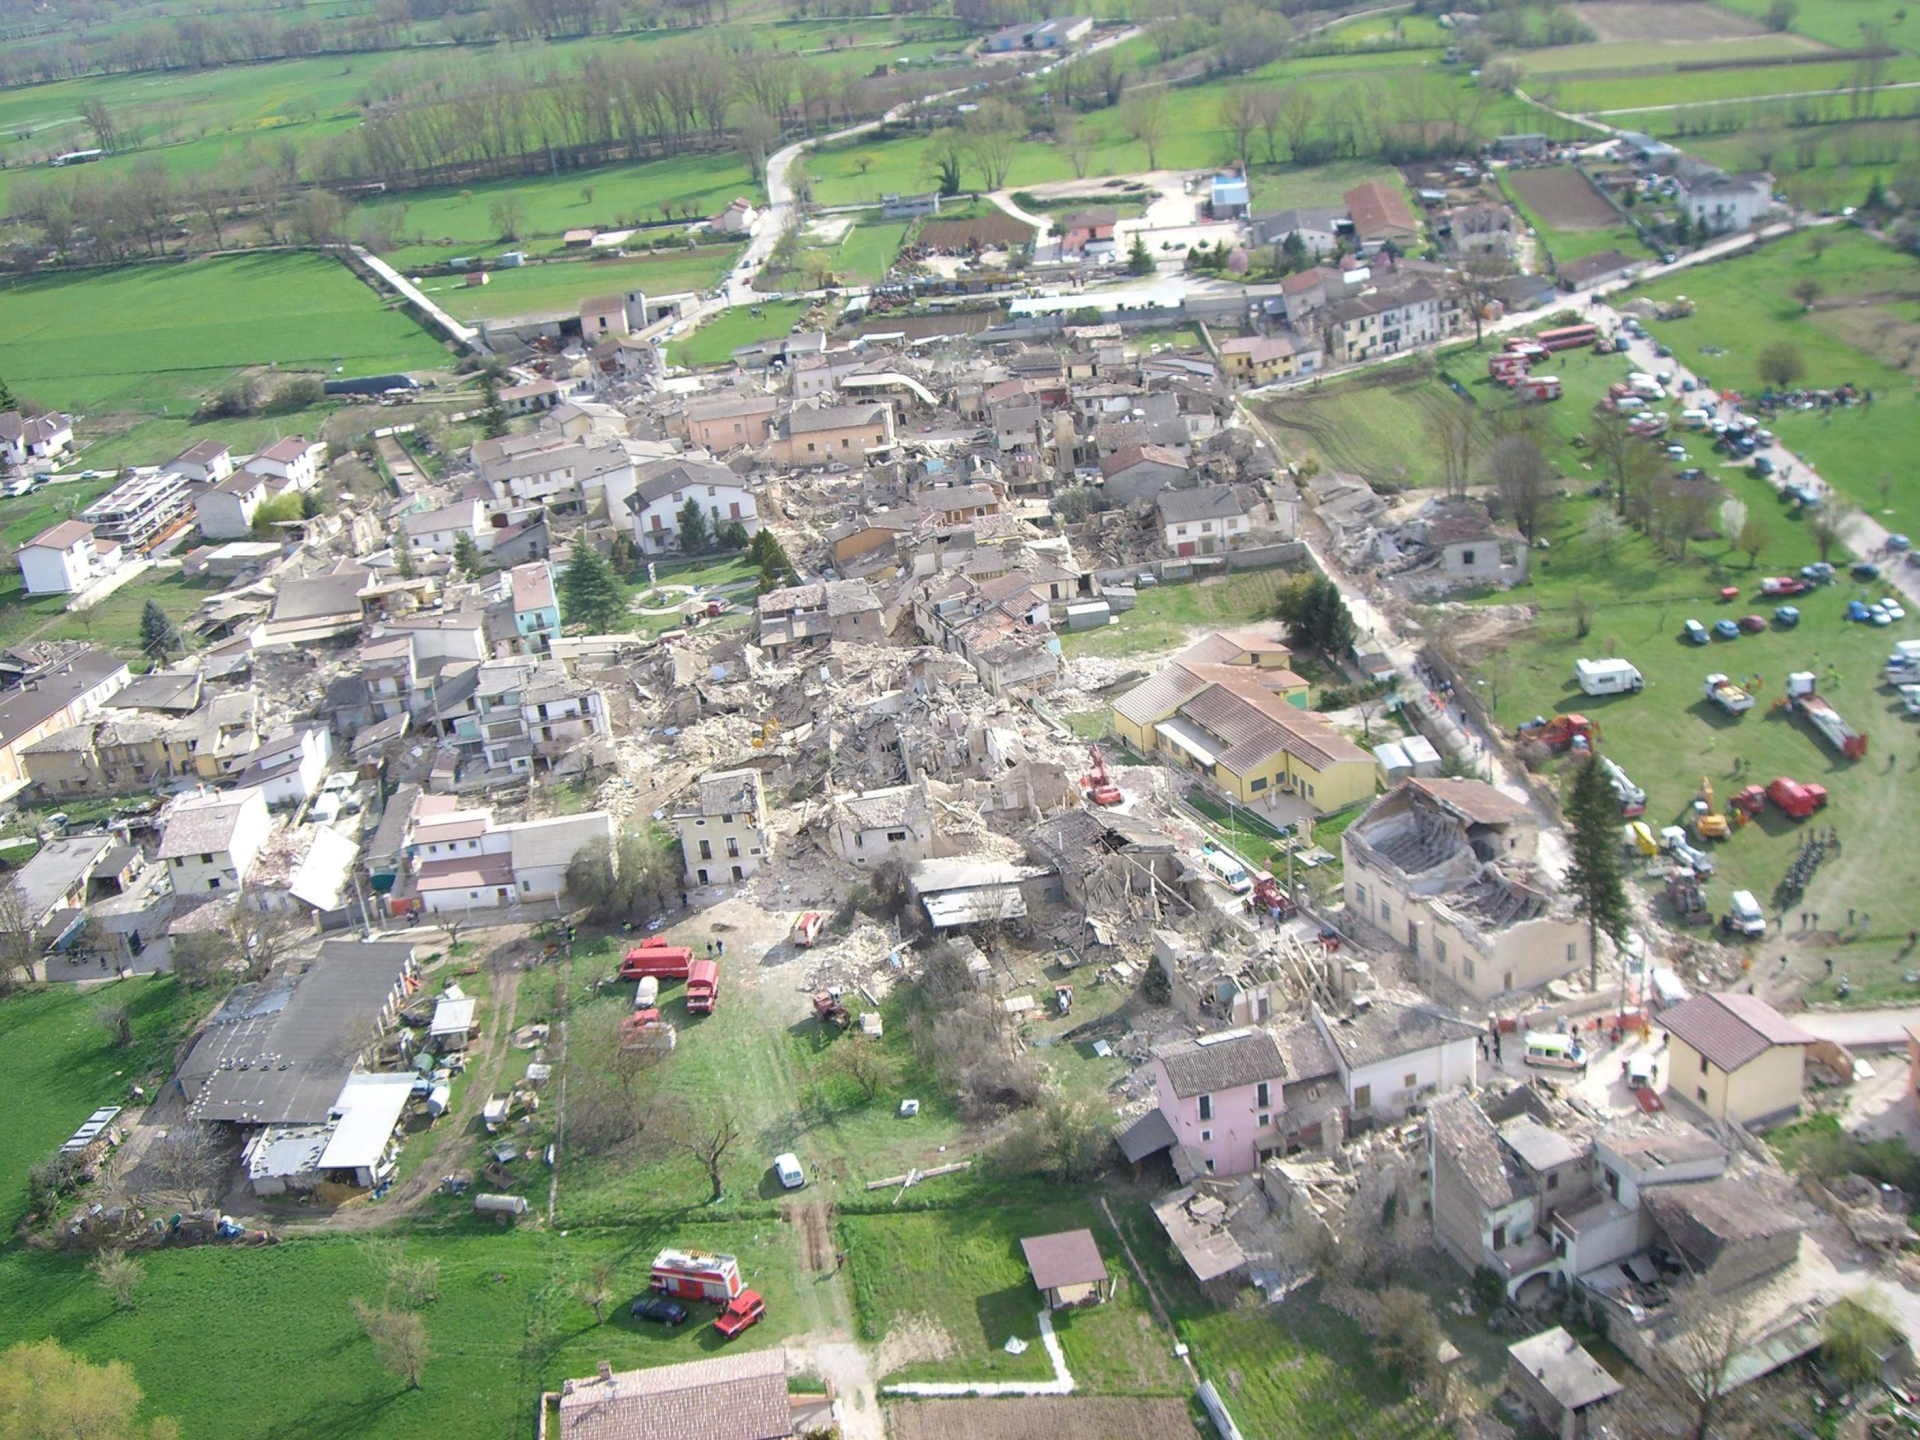 epa01690056 A view from helicopter shows the village of Onna, in the province of L'Aquila, Italy seriously hit by the earthquake on 06 April 2009. Some 90 people died the quake, which struck the ancient town of L'Aquila and the surrounding mountainous areas about 100 km  north-east of Rome in the early hours. EPA/CIRO FUSCO